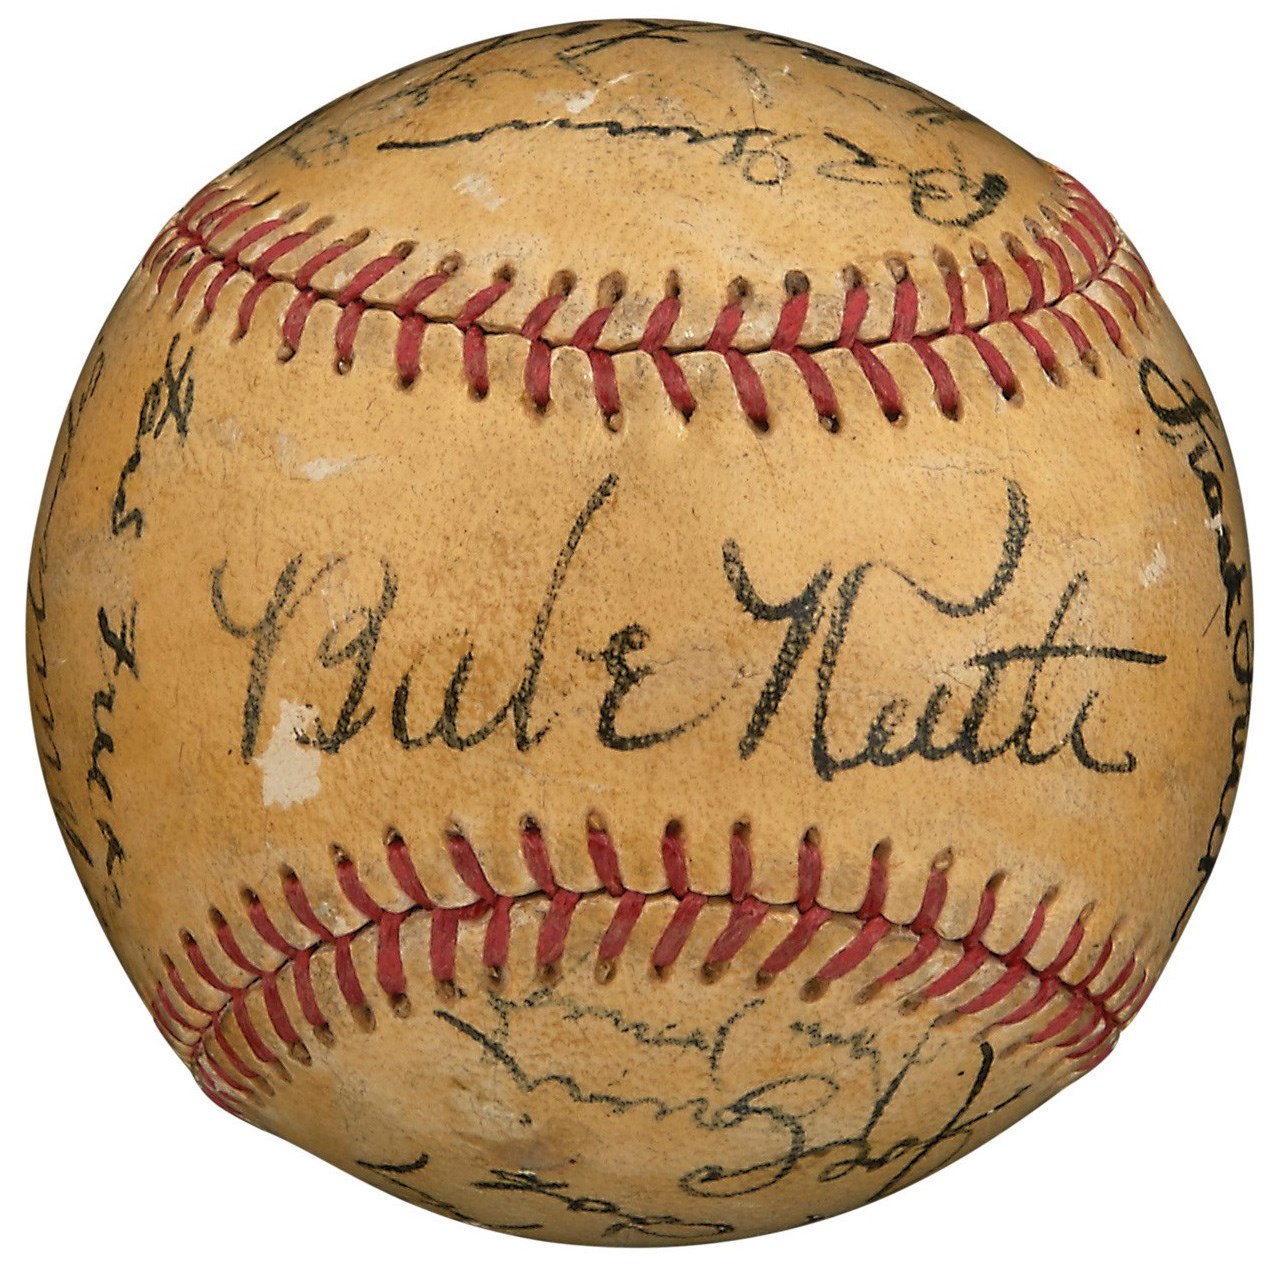 - 1938 Babe Ruth and Hall of Famers Signed Baseball at NYC Press Club Dinner (PSA & JSA)